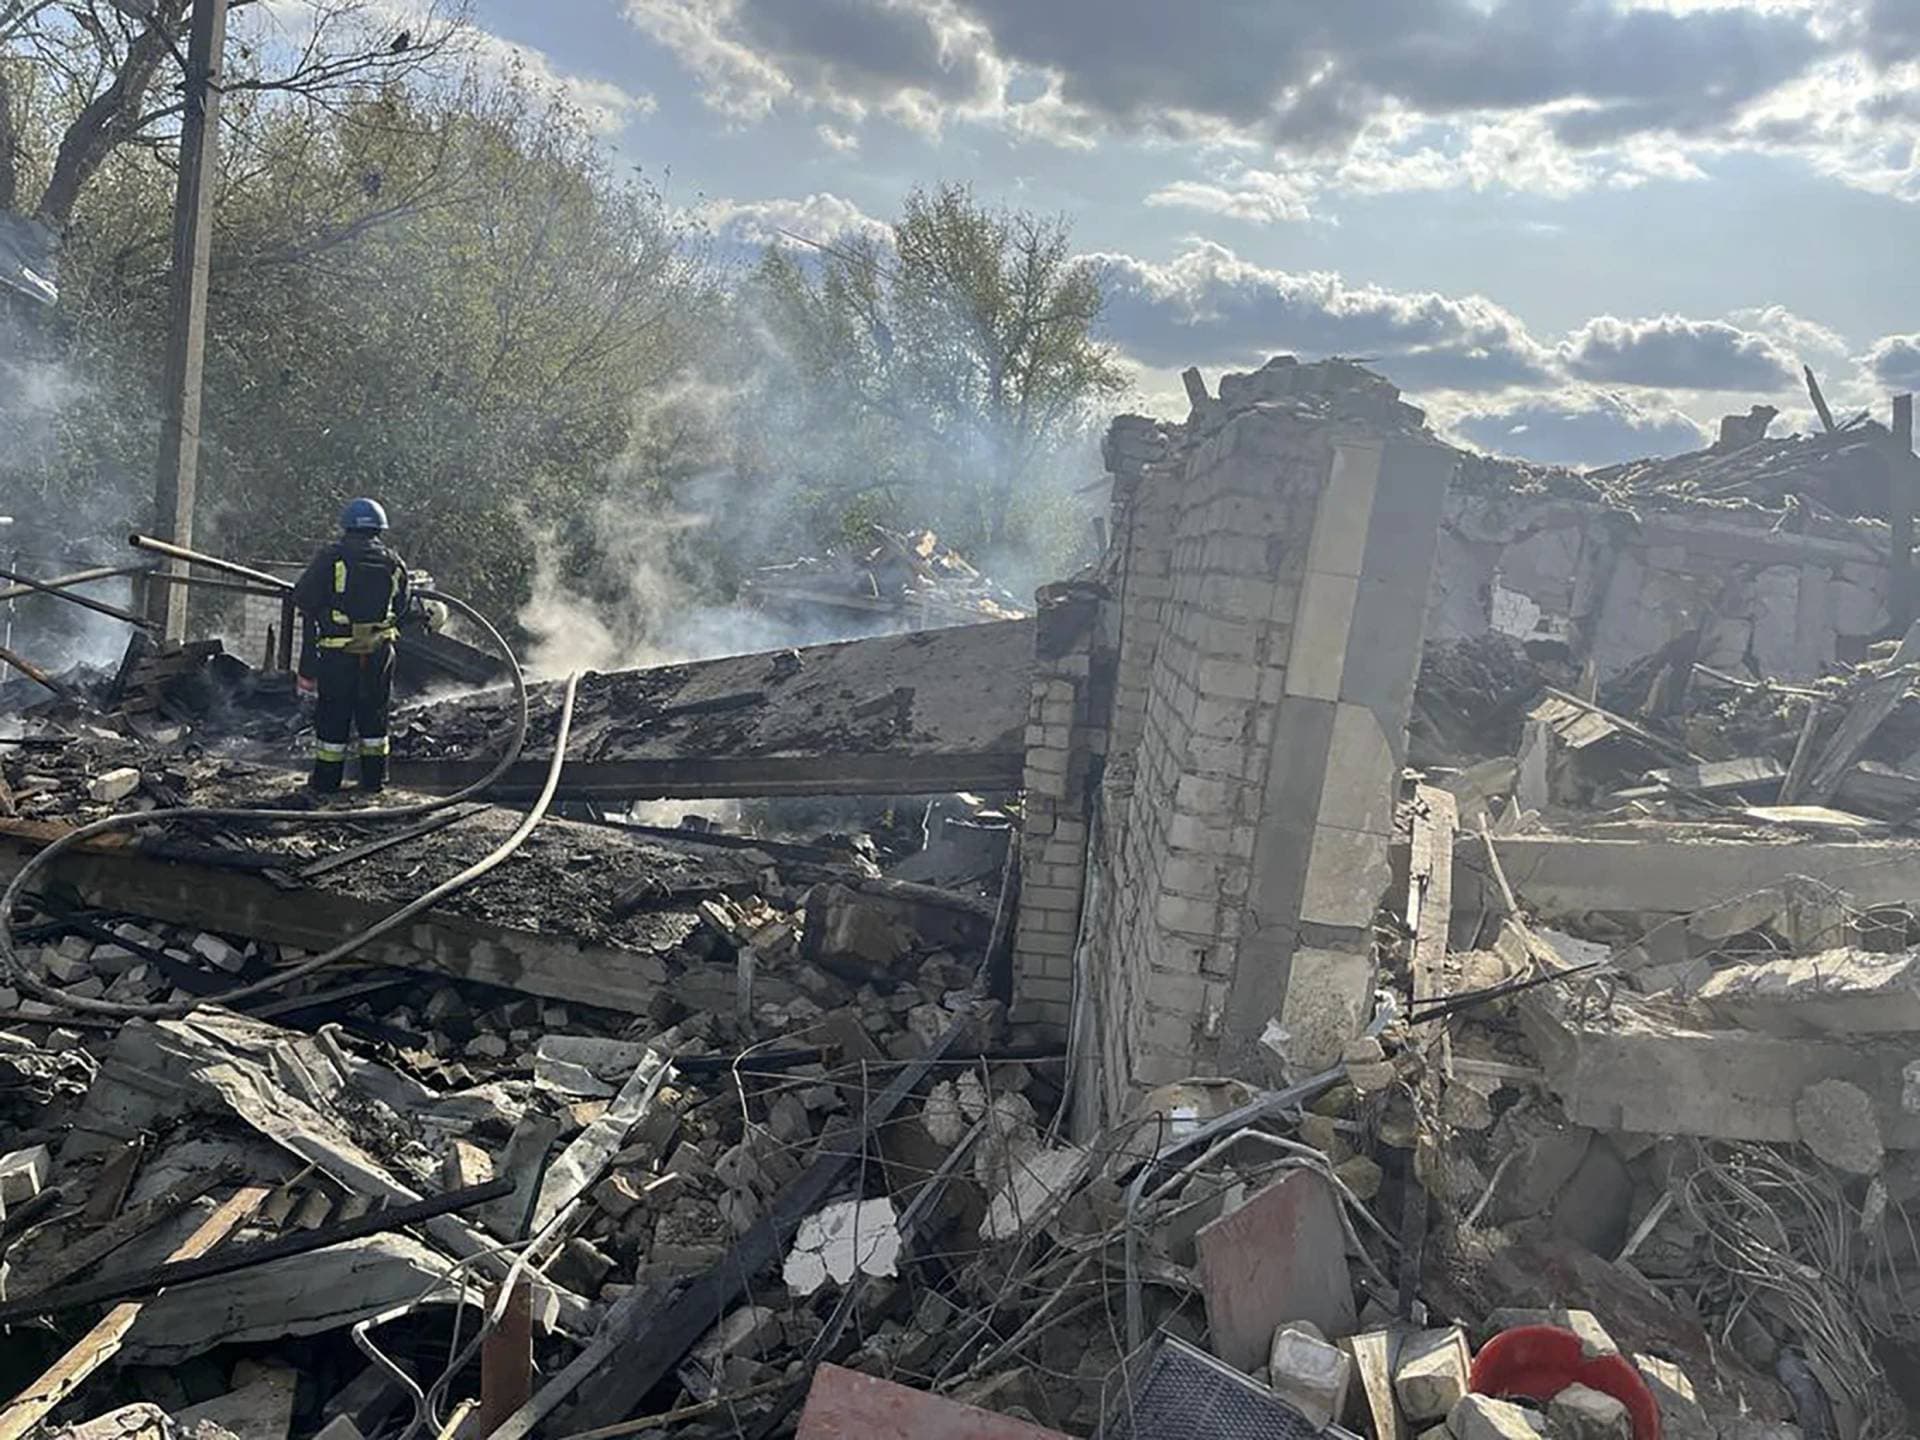 firefighters work to extinguish a fire after the deadly Russian rocket attack that killed 51 people in the village of Hroza